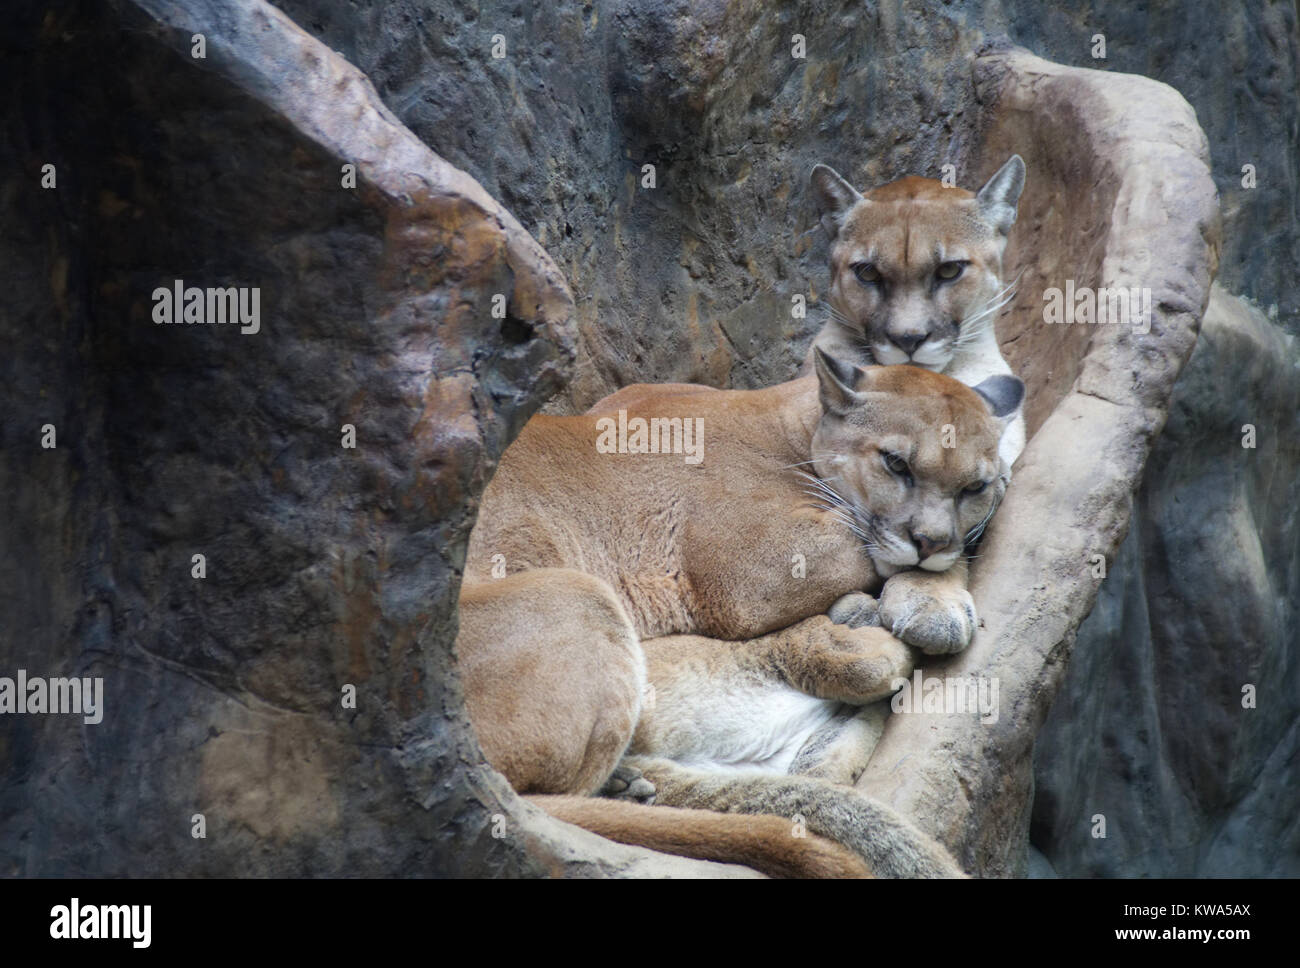 Pair of Mountain Lions resting, sleeping ont he rocks Stock Photo